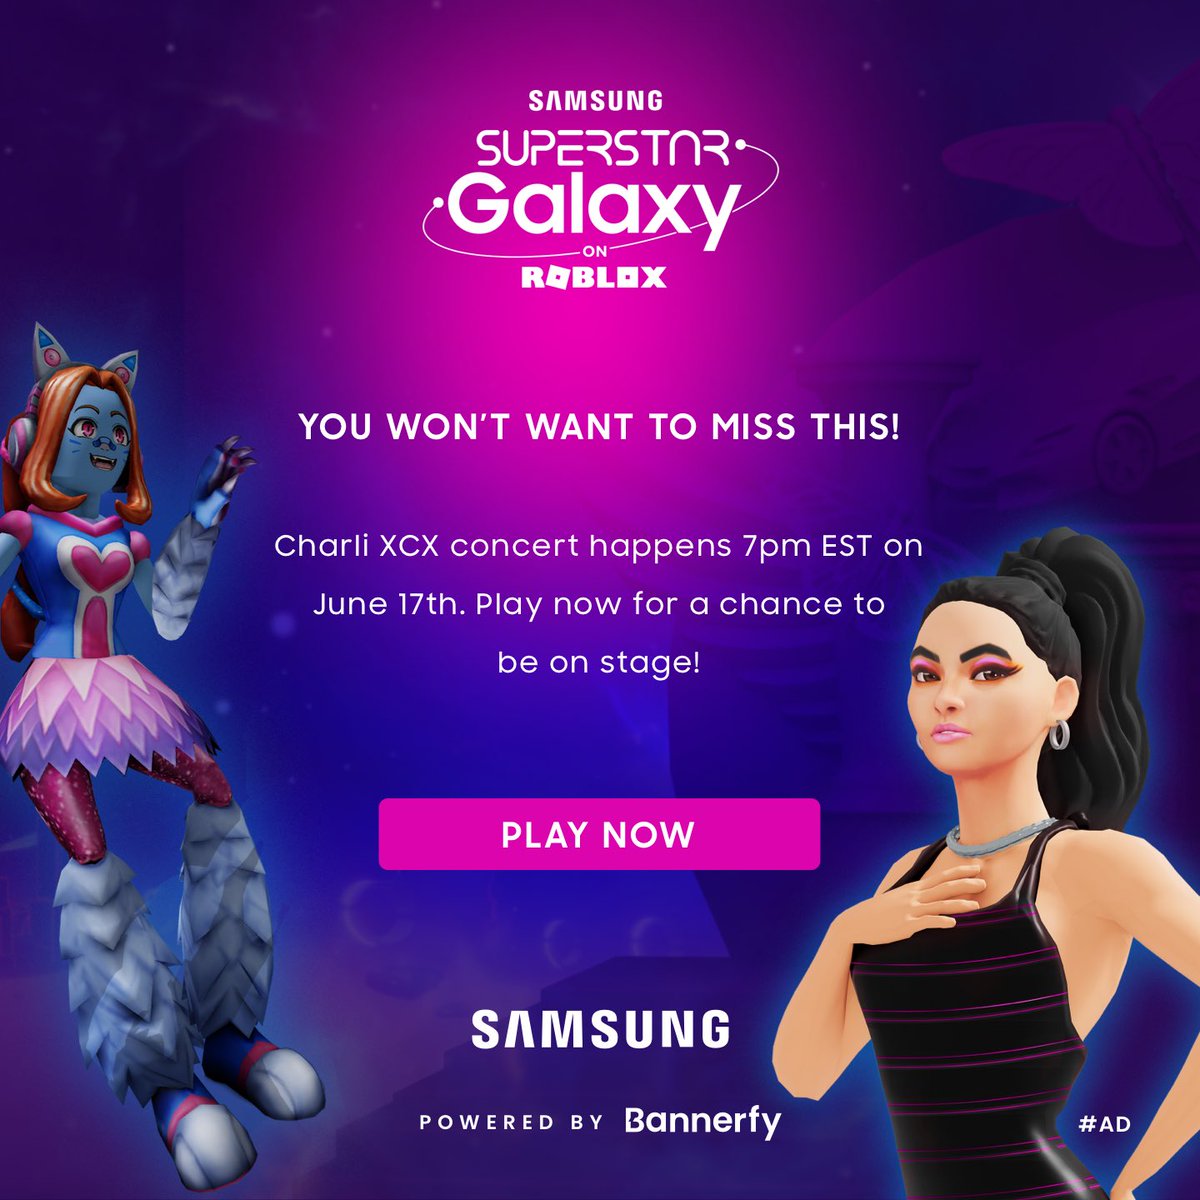 Check out Superstar Galaxy on Roblox today! 🌠 #ad bit.ly/superstargalaxy